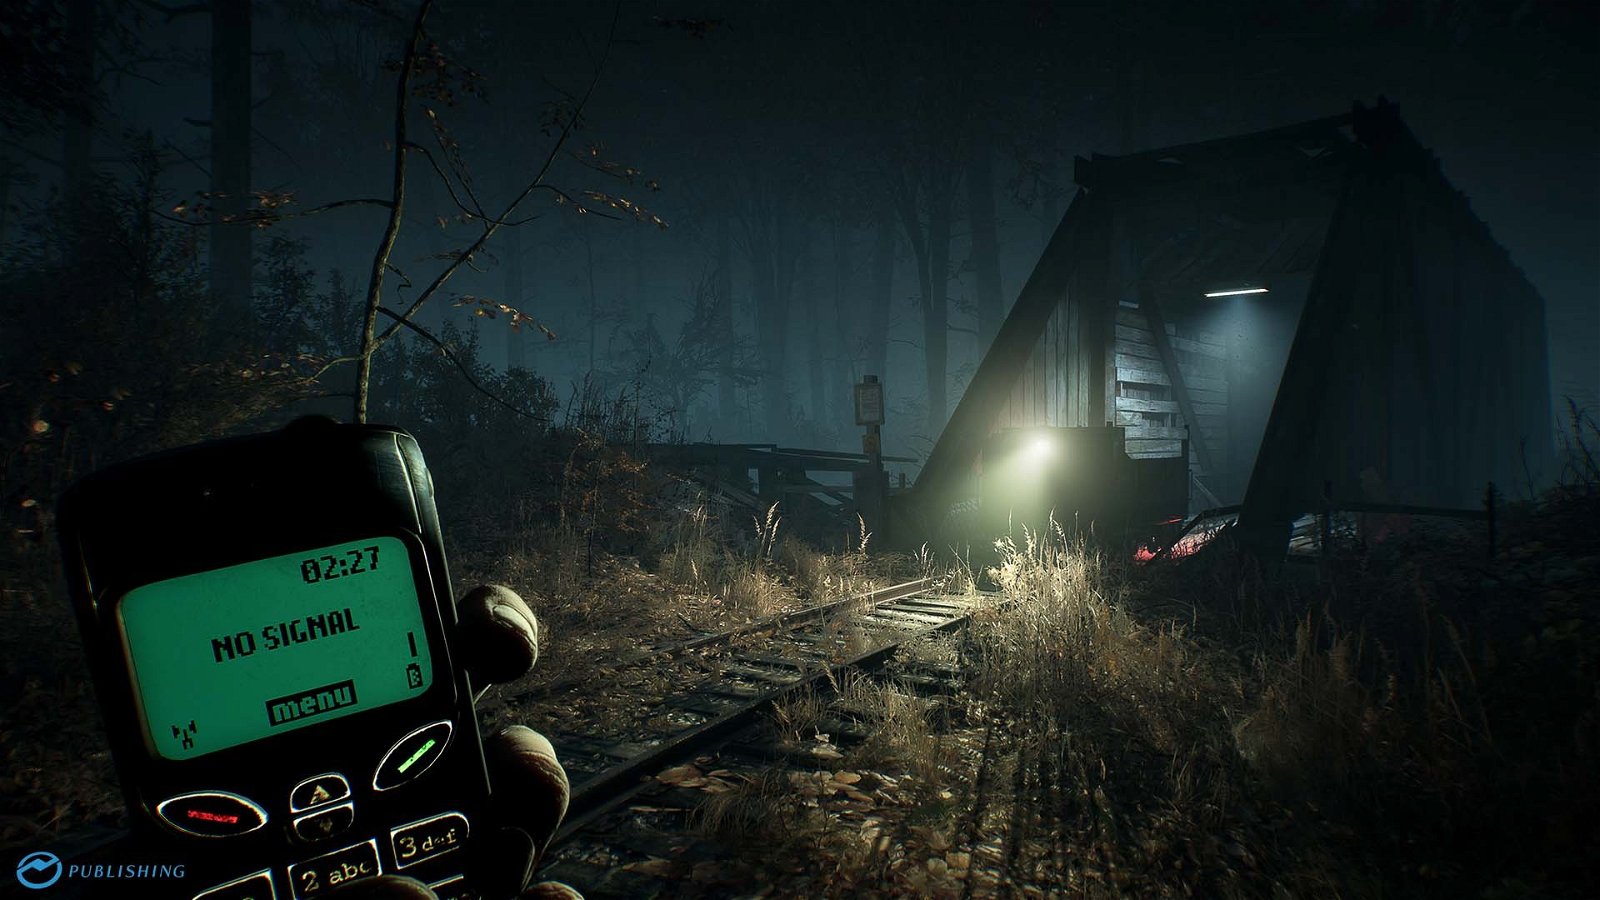 Blair Witch, Switch, Nintendo Switch, Japan, Multi-language, English, release date, gameplay, features, price